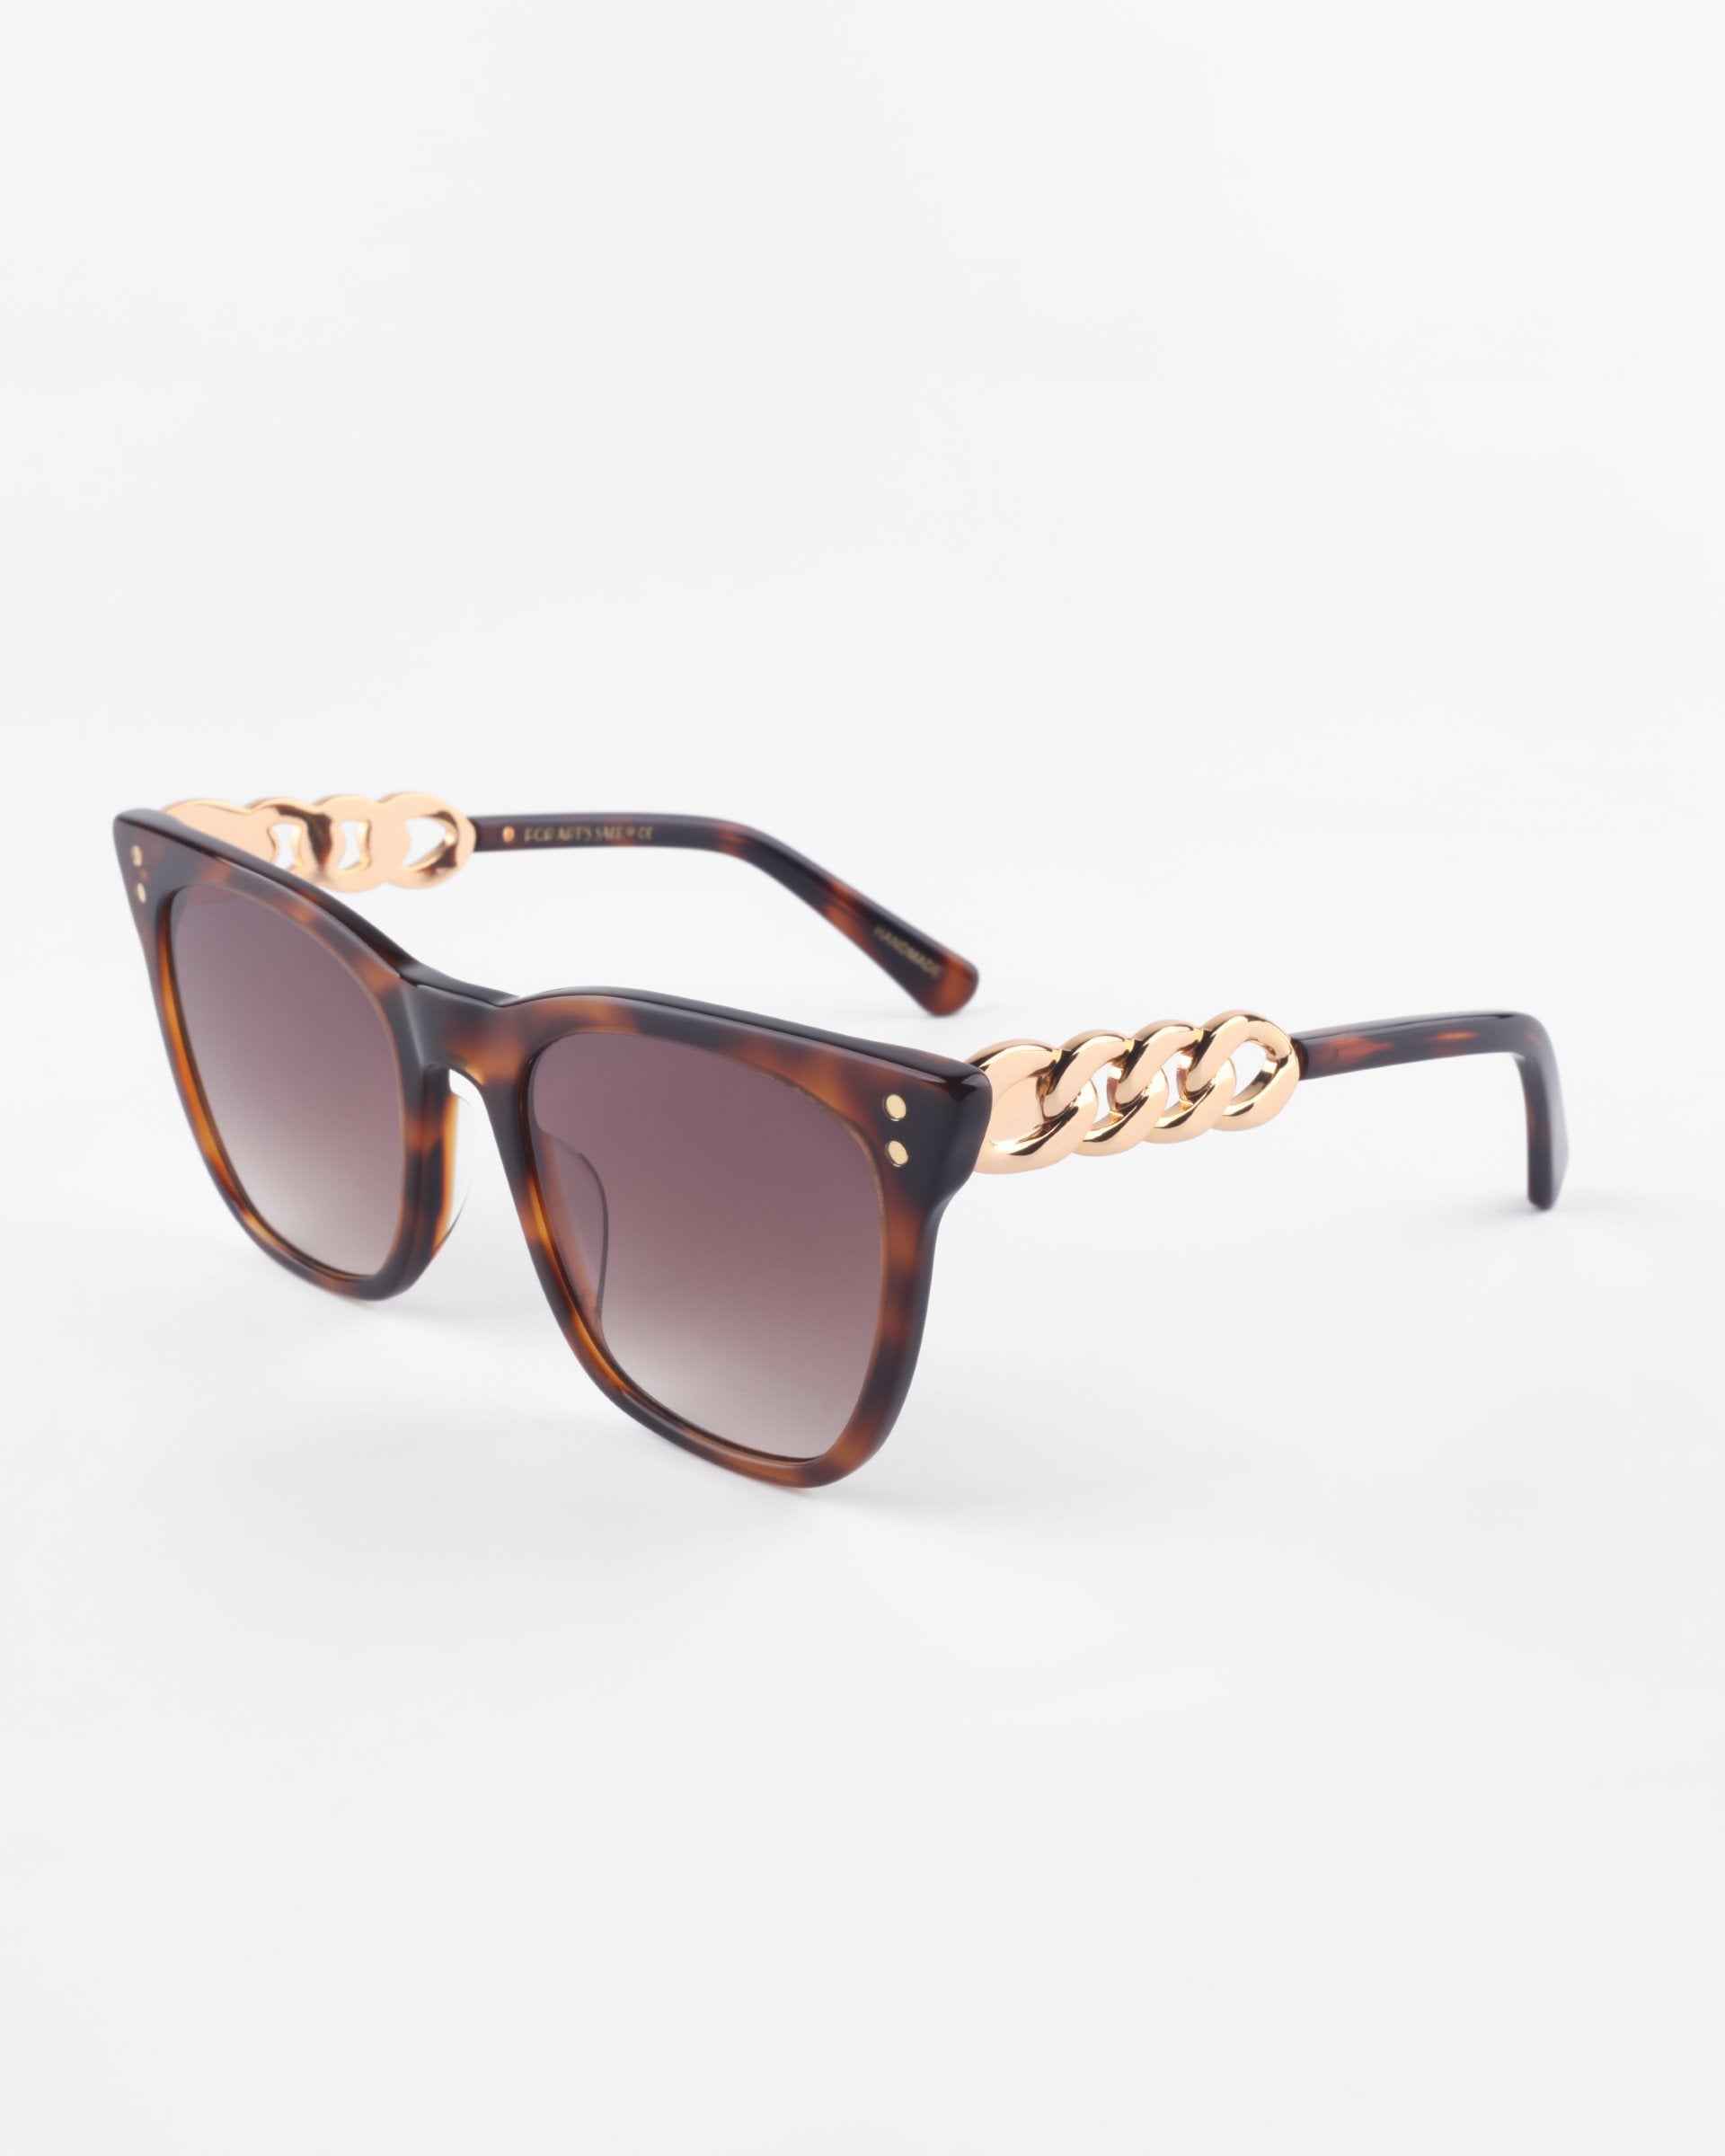 A pair of stylish Deco cat-eye sunglasses by For Art&#39;s Sake® with tortoiseshell acetate frames and dark lenses. The arms of the Deco sunglasses feature a distinctive gold chain link design near the hinges. The background is plain white.